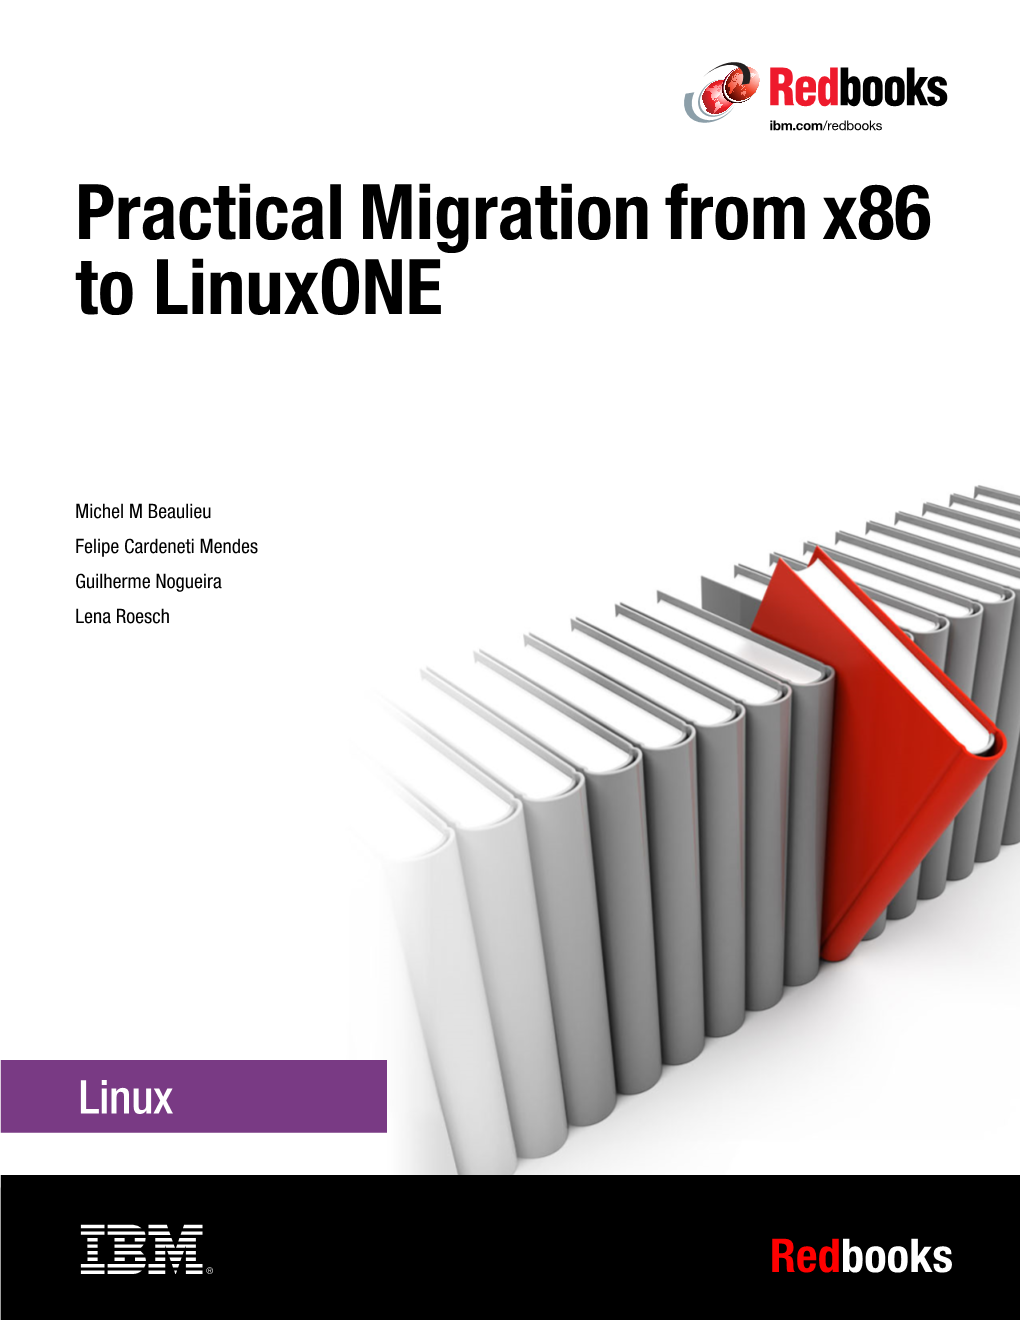 Practical Migration from X86 to Linuxone